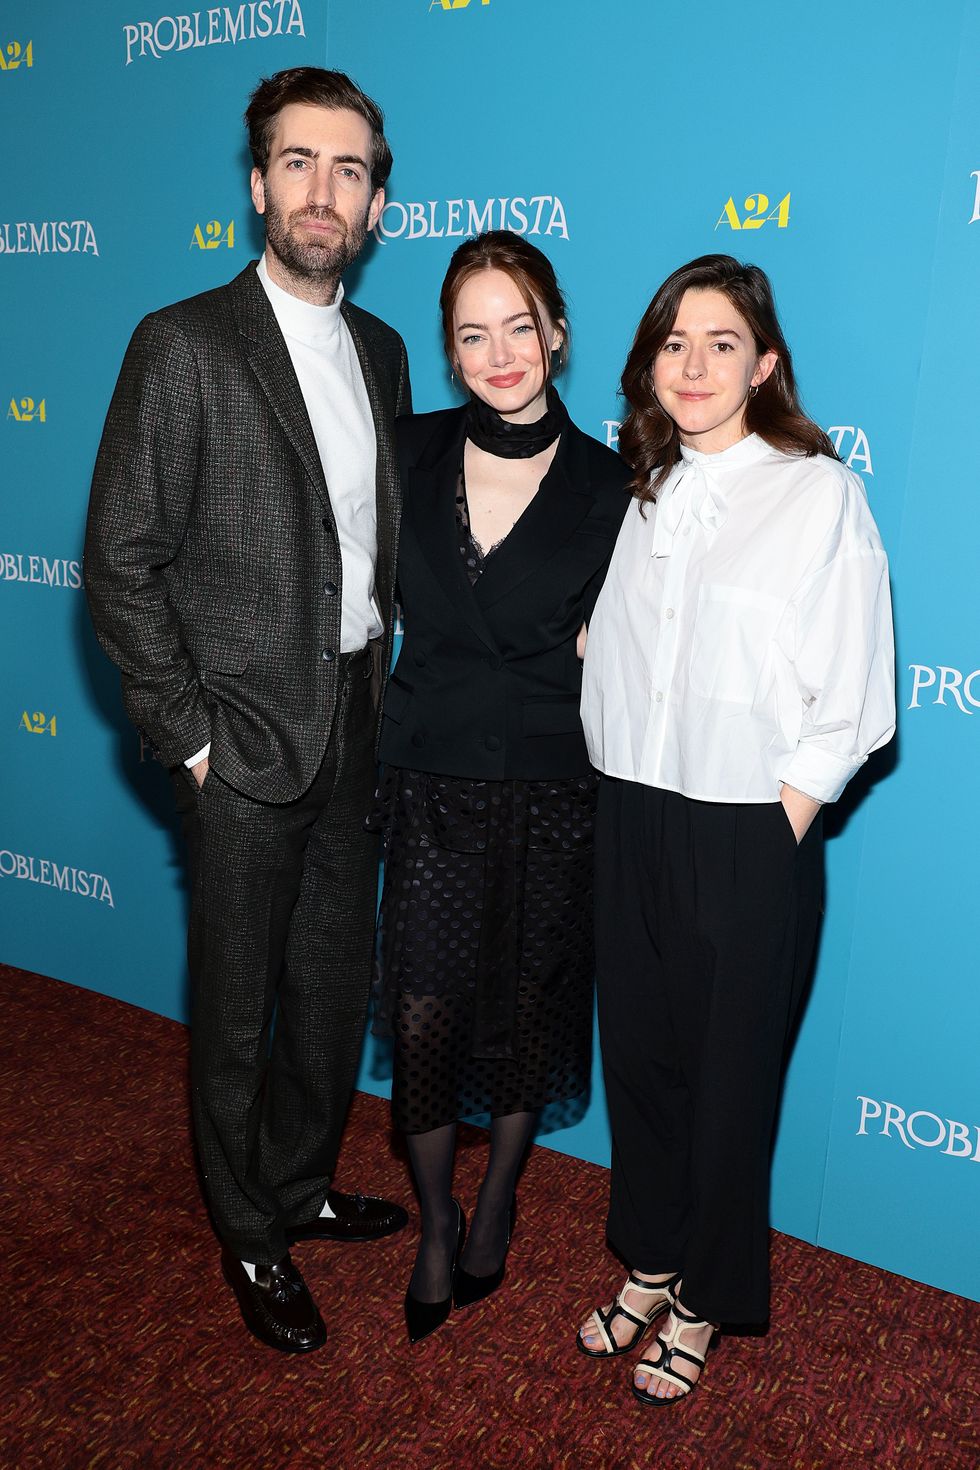 dave mccary, emma stone, and ali herting at problemista's new york screening